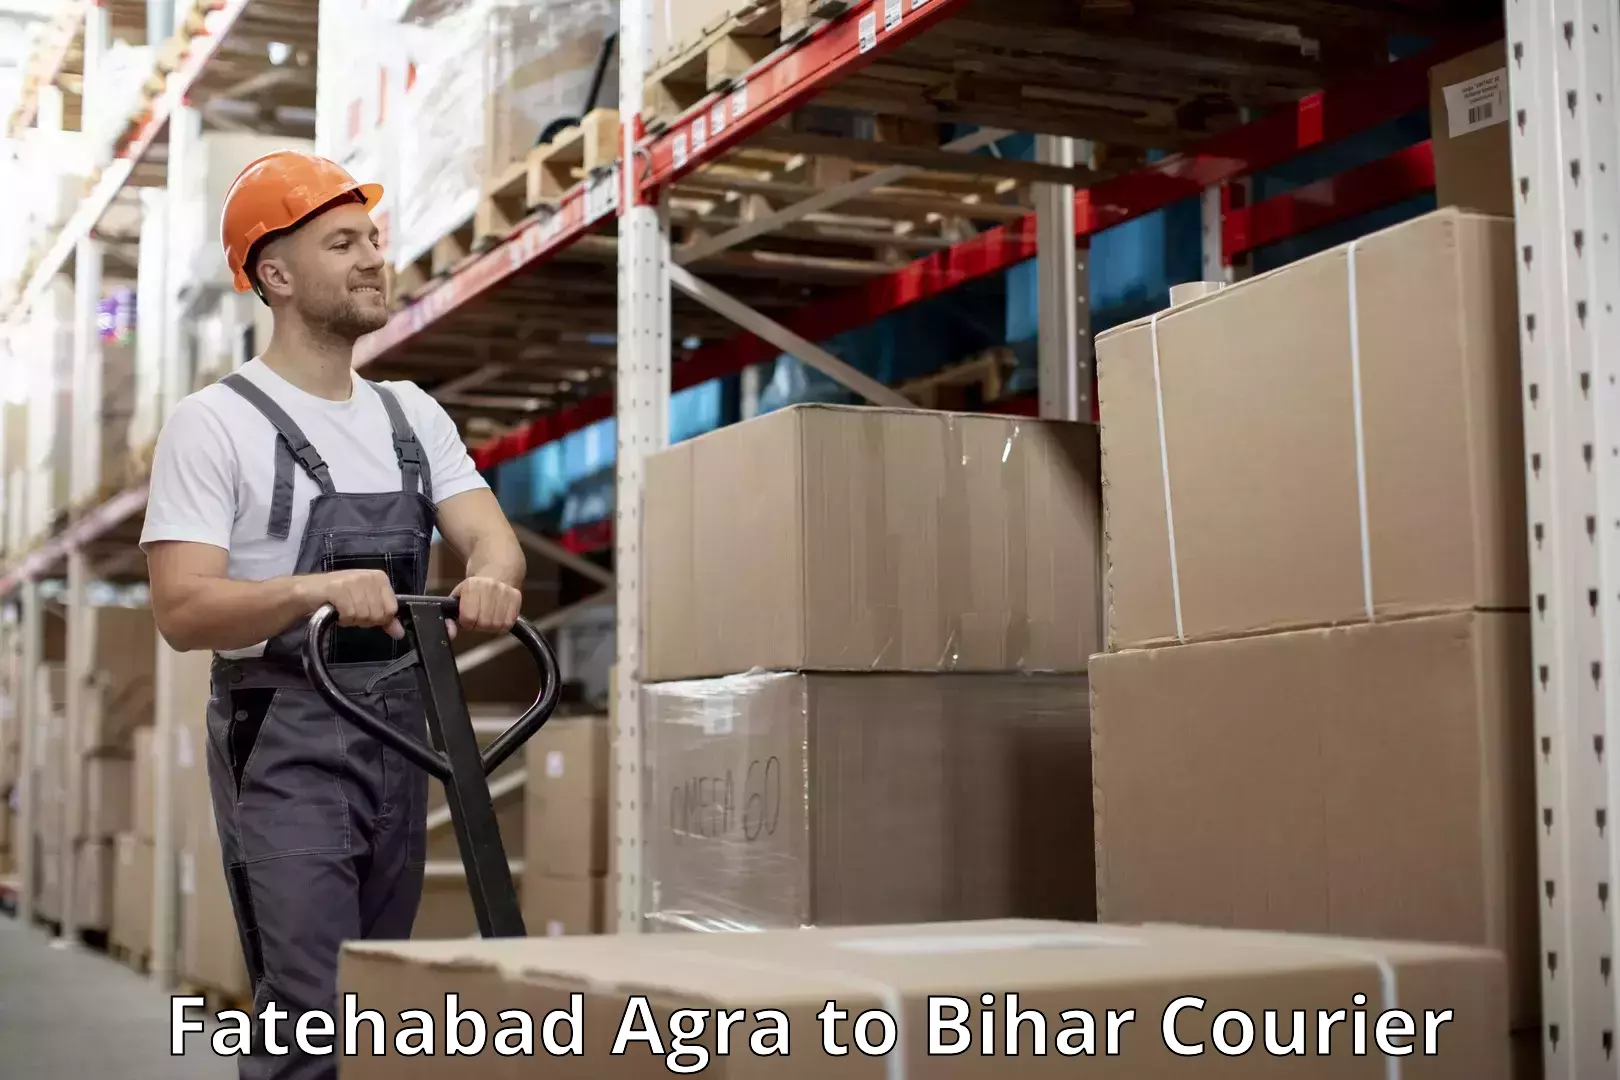 Baggage delivery management Fatehabad Agra to Bihar